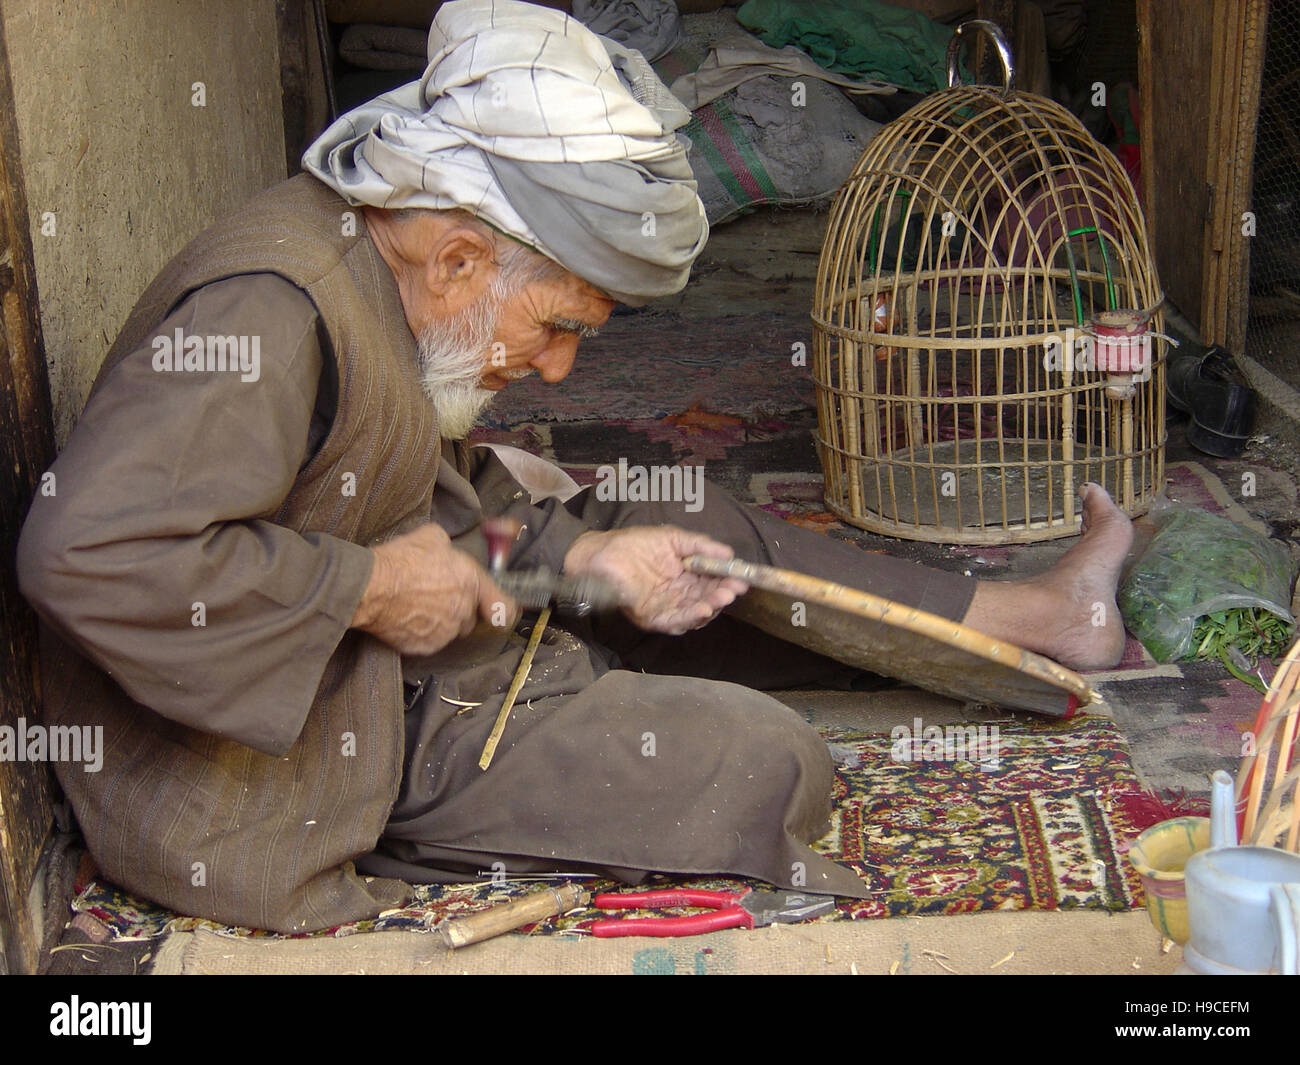 28th May 2004 An old man wearing a lungee (turban) makes wicker bird-cages inside the Ka Farushi bazaar in Kabul, Afghanistan. Stock Photo